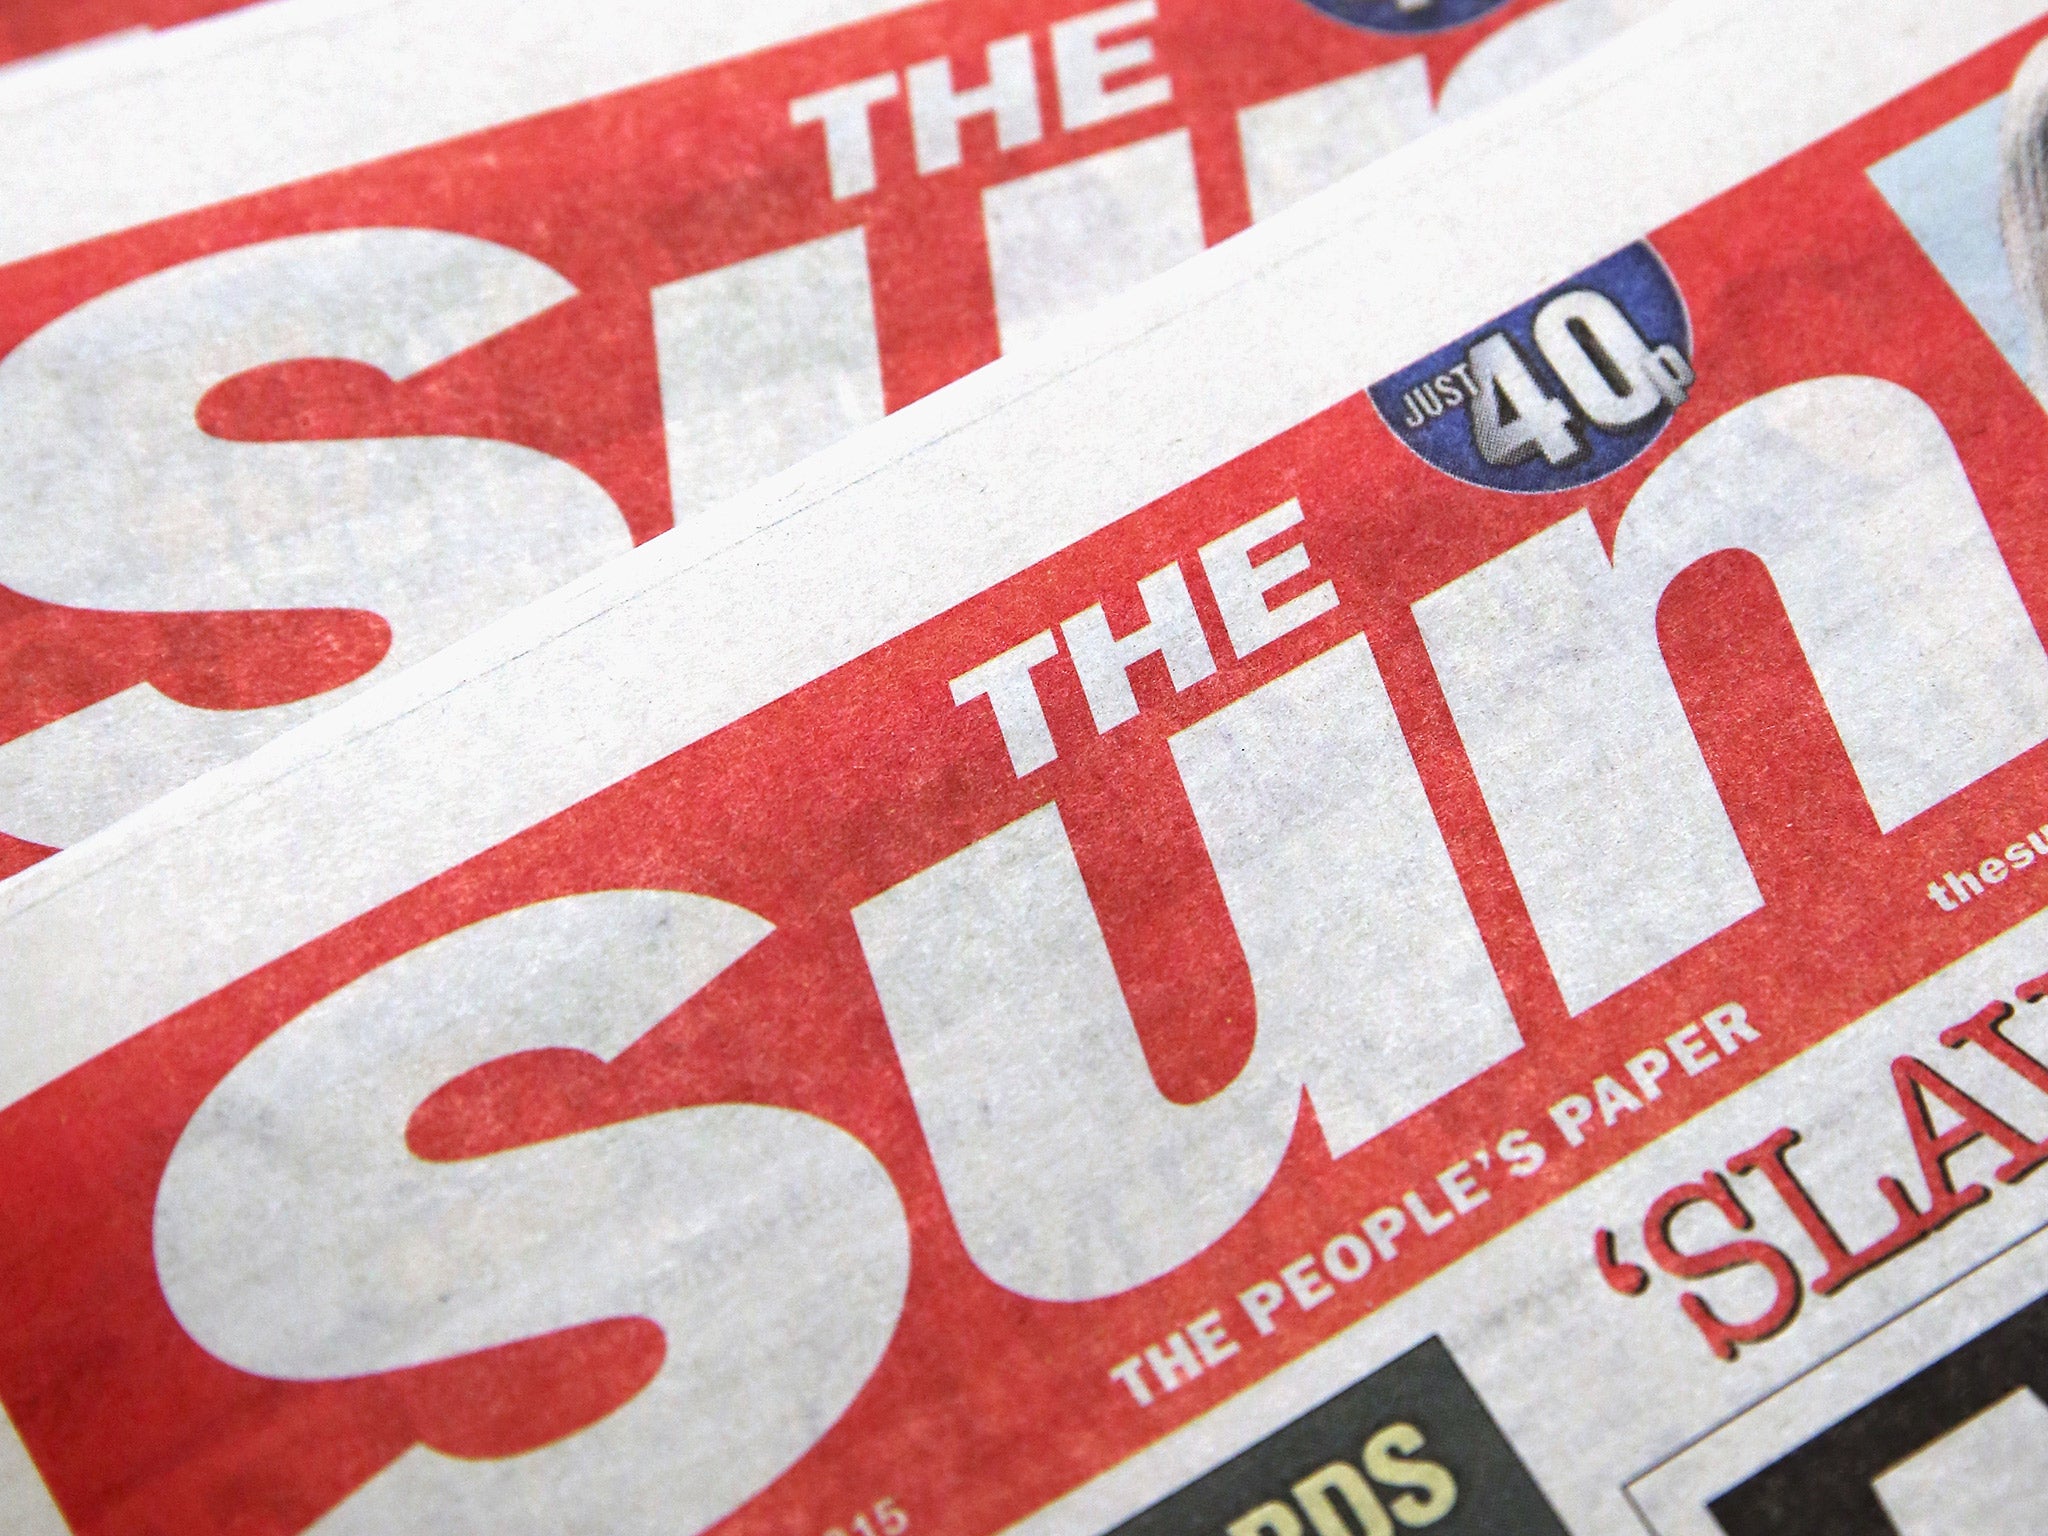 The Sun is to expand its brand to the gambling and holiday markets